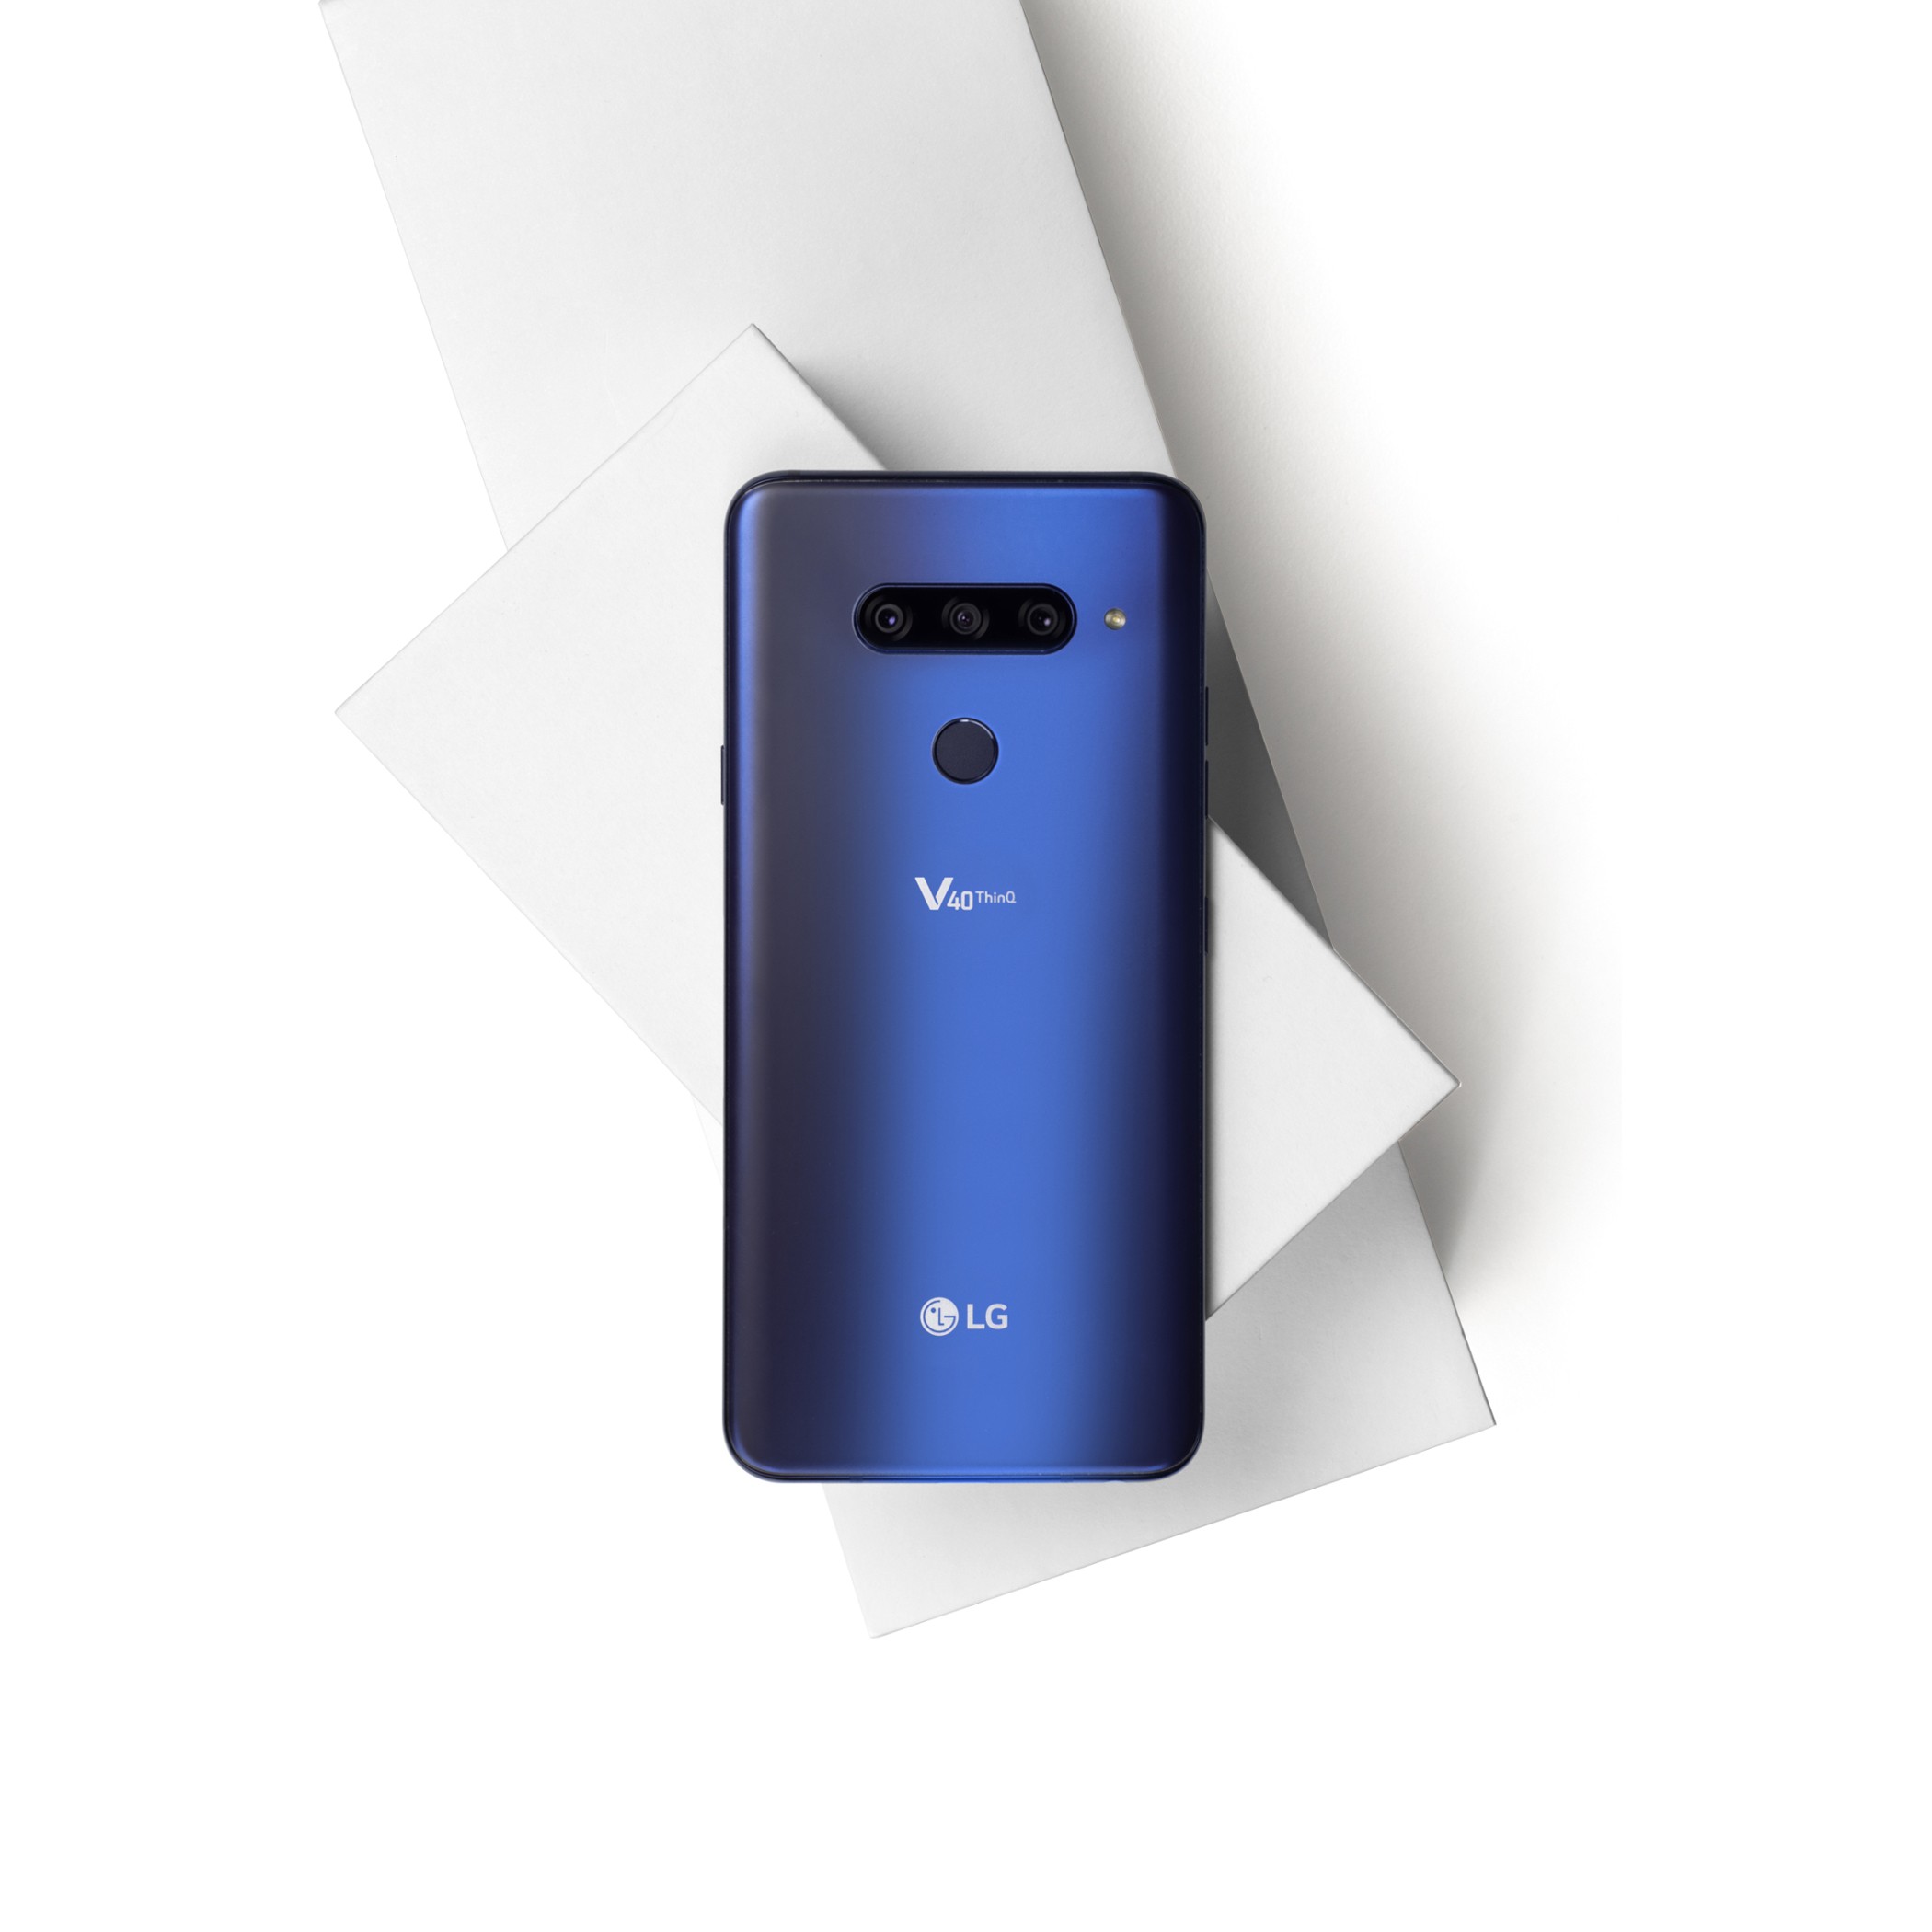 The rear view of the LG V40 ThinQ in New Moroccan Blue